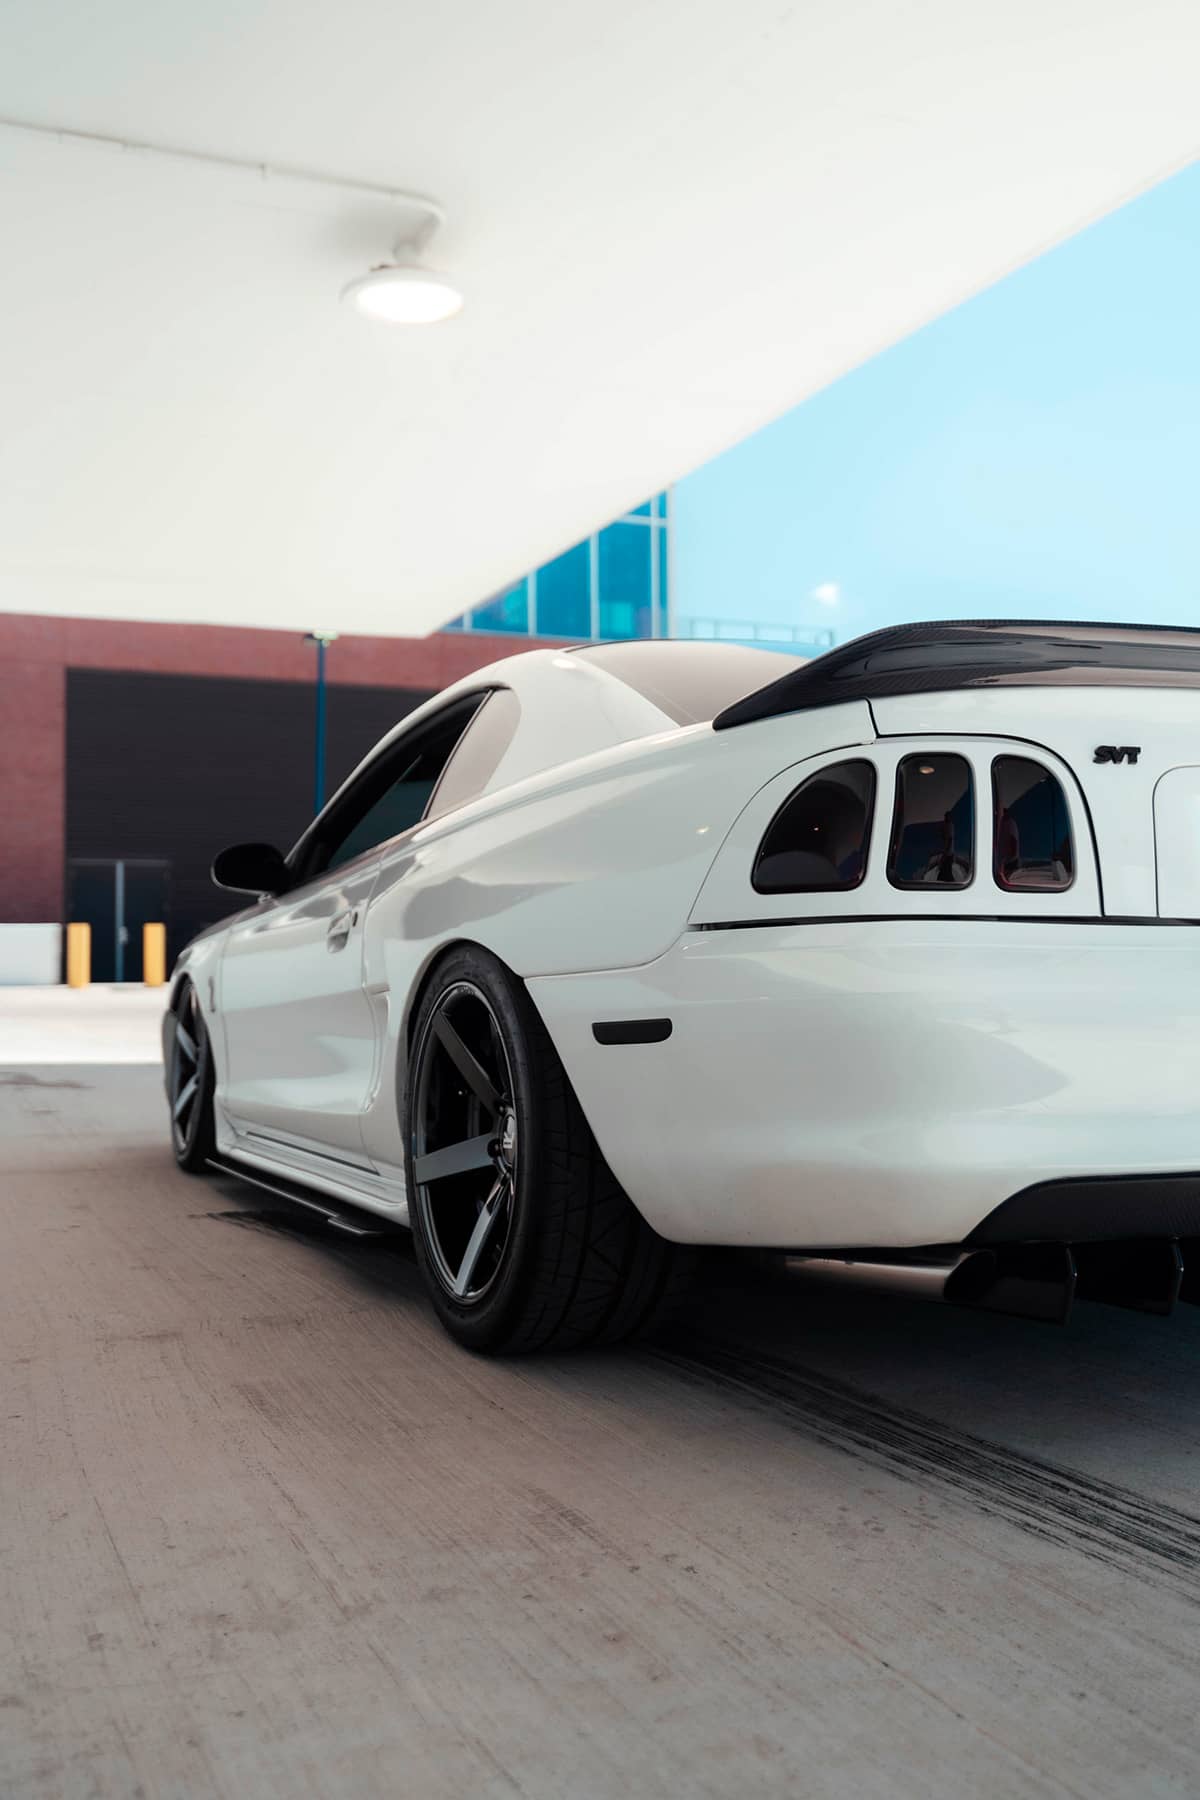 Modified 1997 Ford Mustang Cobra SN95 with blacked out led taillights